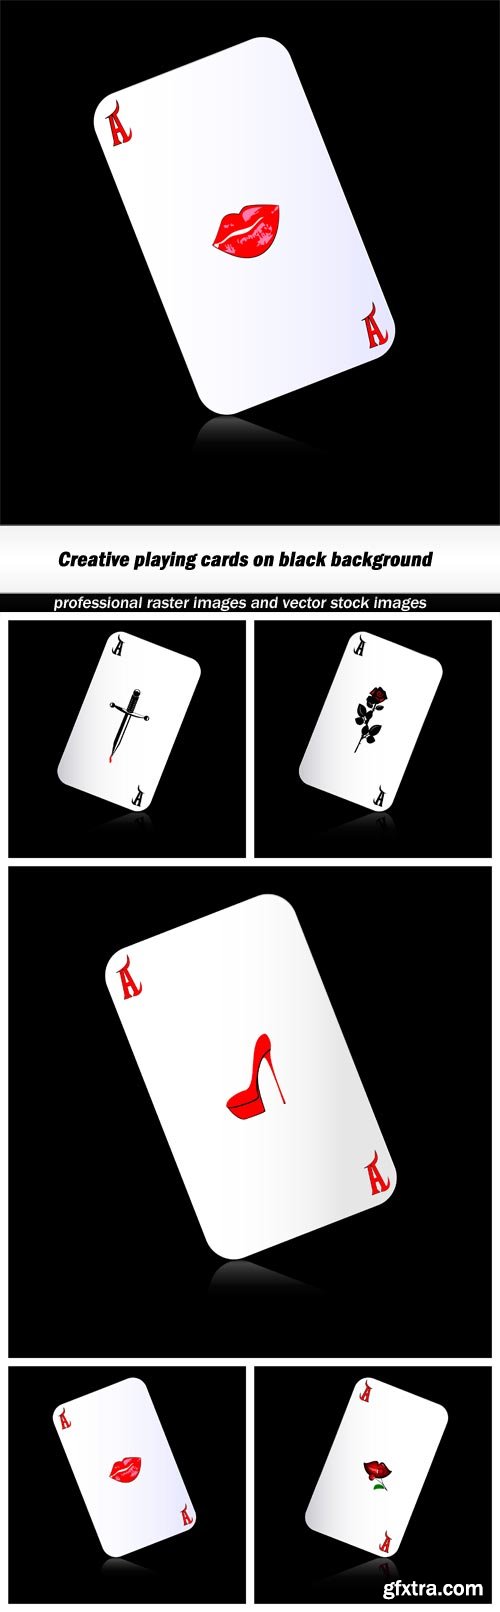 Creative playing cards on black background - 5 EPS